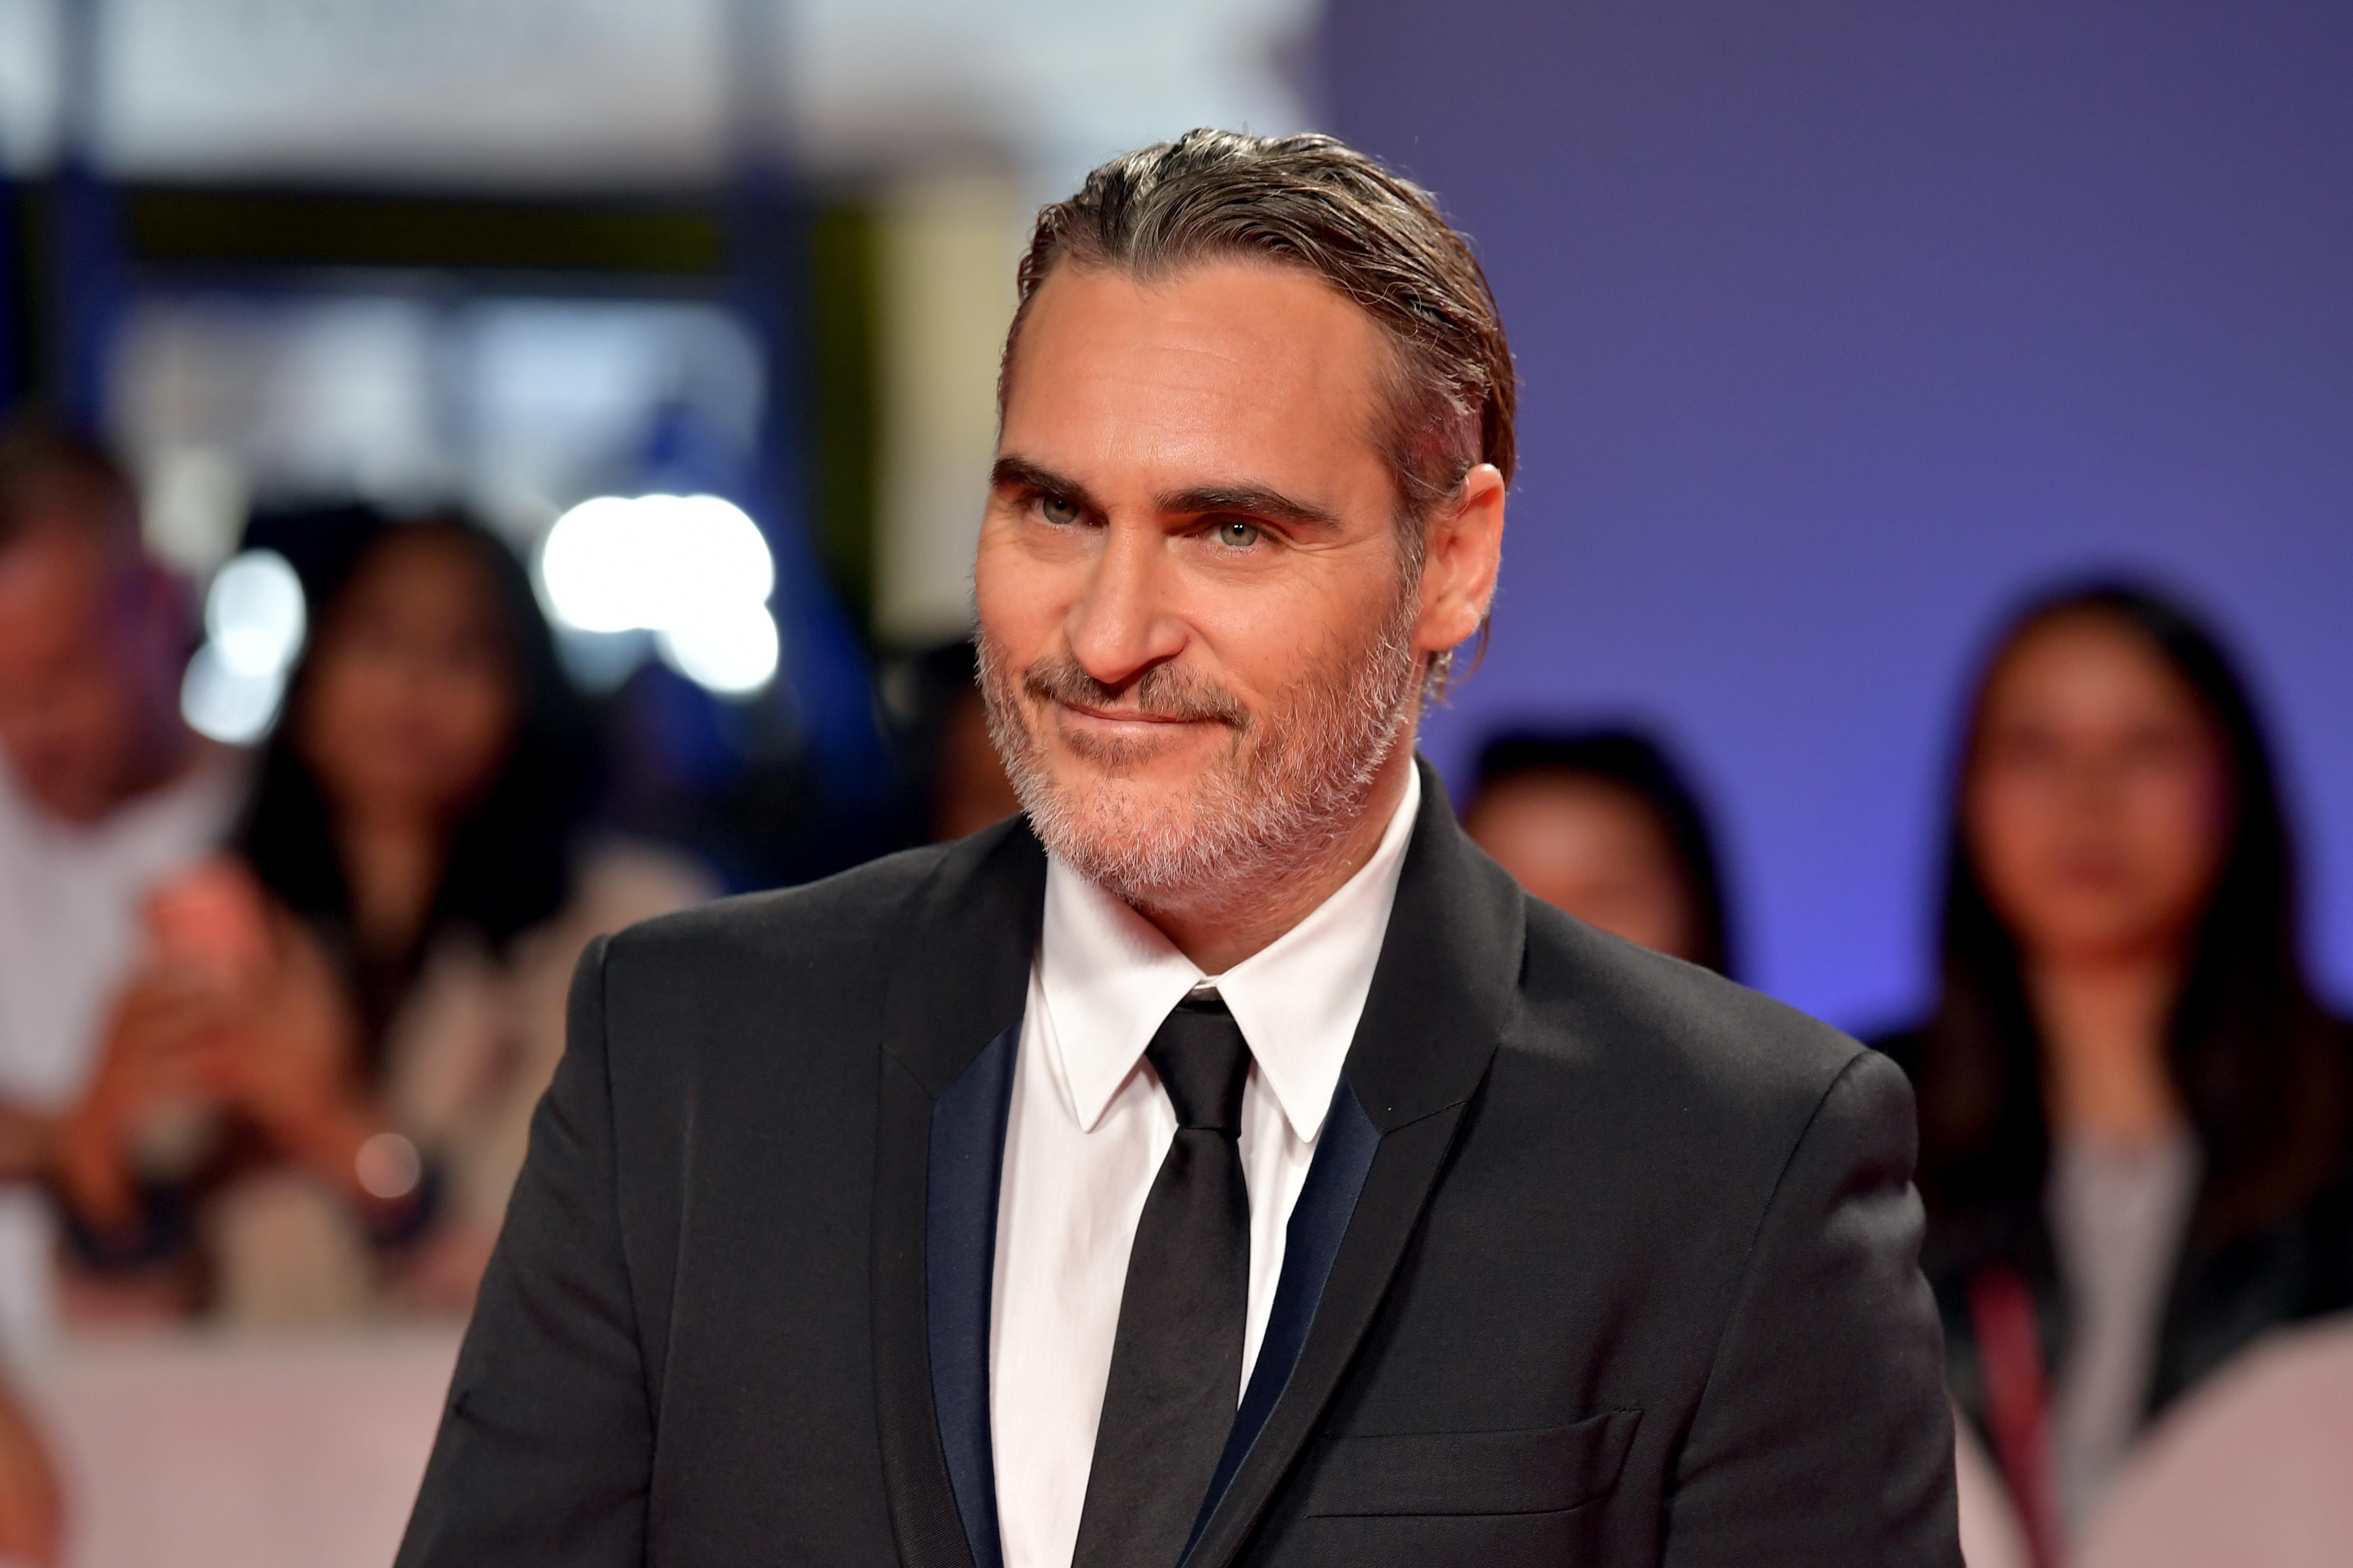 Joaquin Phoenix Was Rude To Reporters, ‘Tricked’ Into The Press Room After His Golden Globe Win